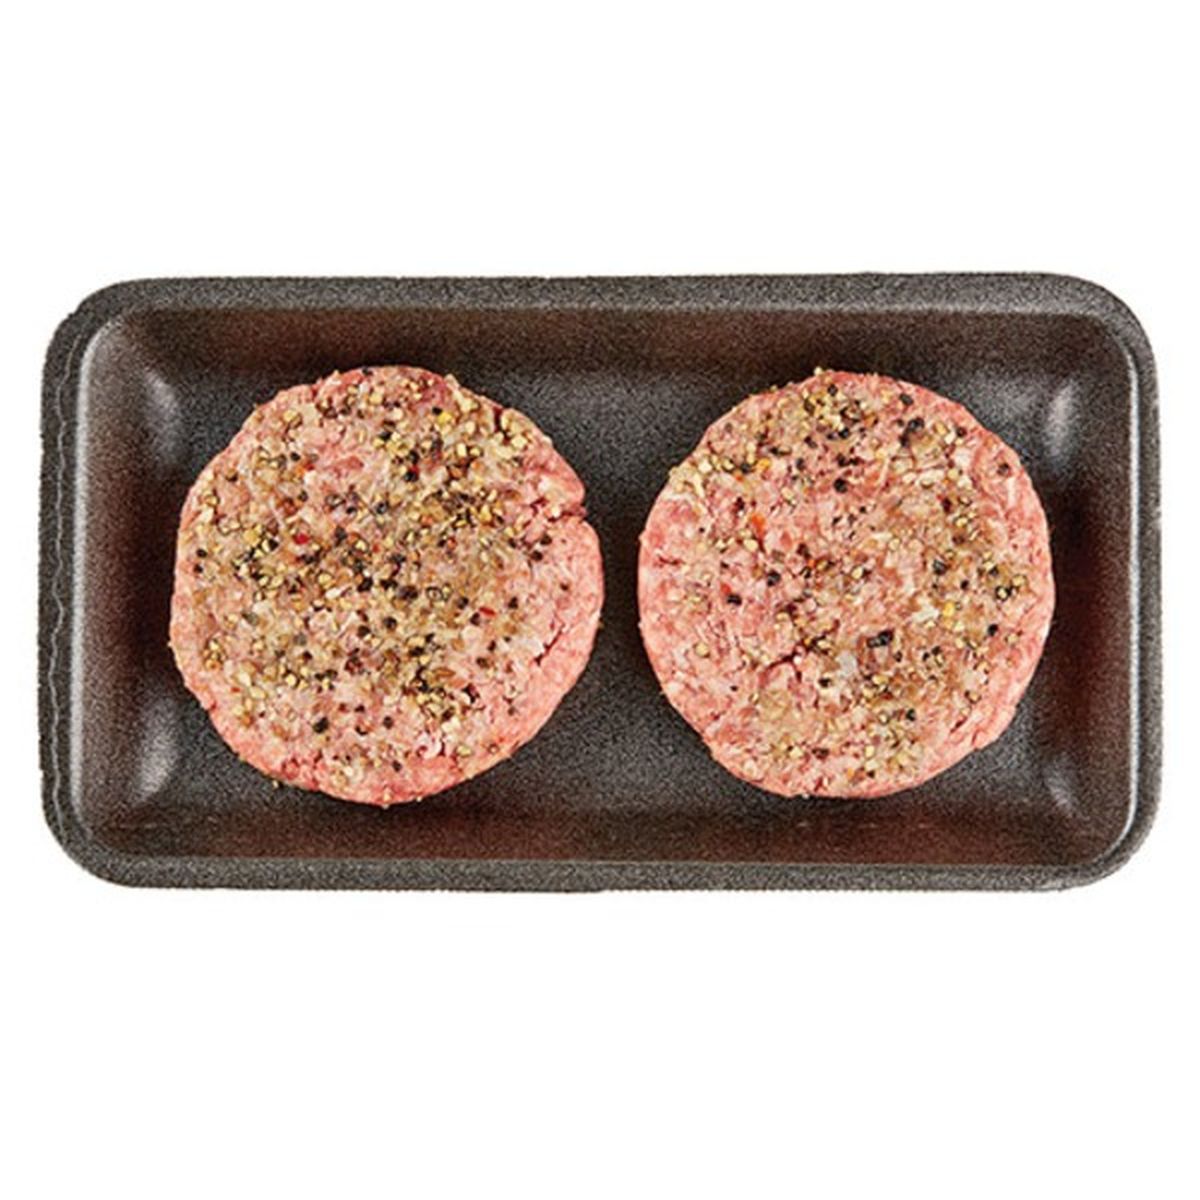 Calories in Wegmans Ready to Cook Cracked Pepper Burger